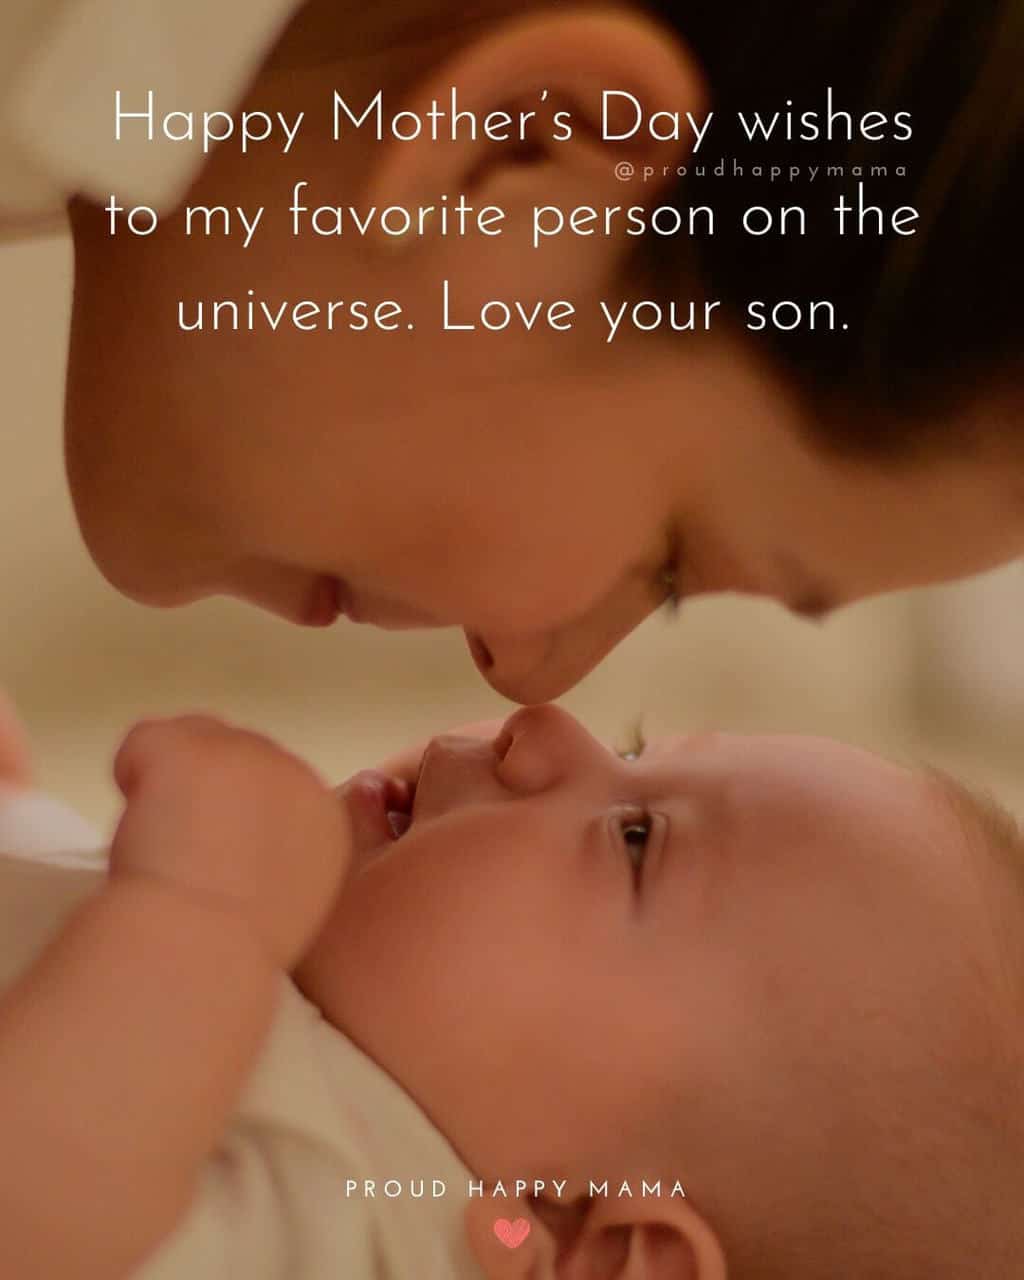 Good Mothers Day Quotes | Happy Mother’s Day wishes to my favorite person on the universe. Love your son.